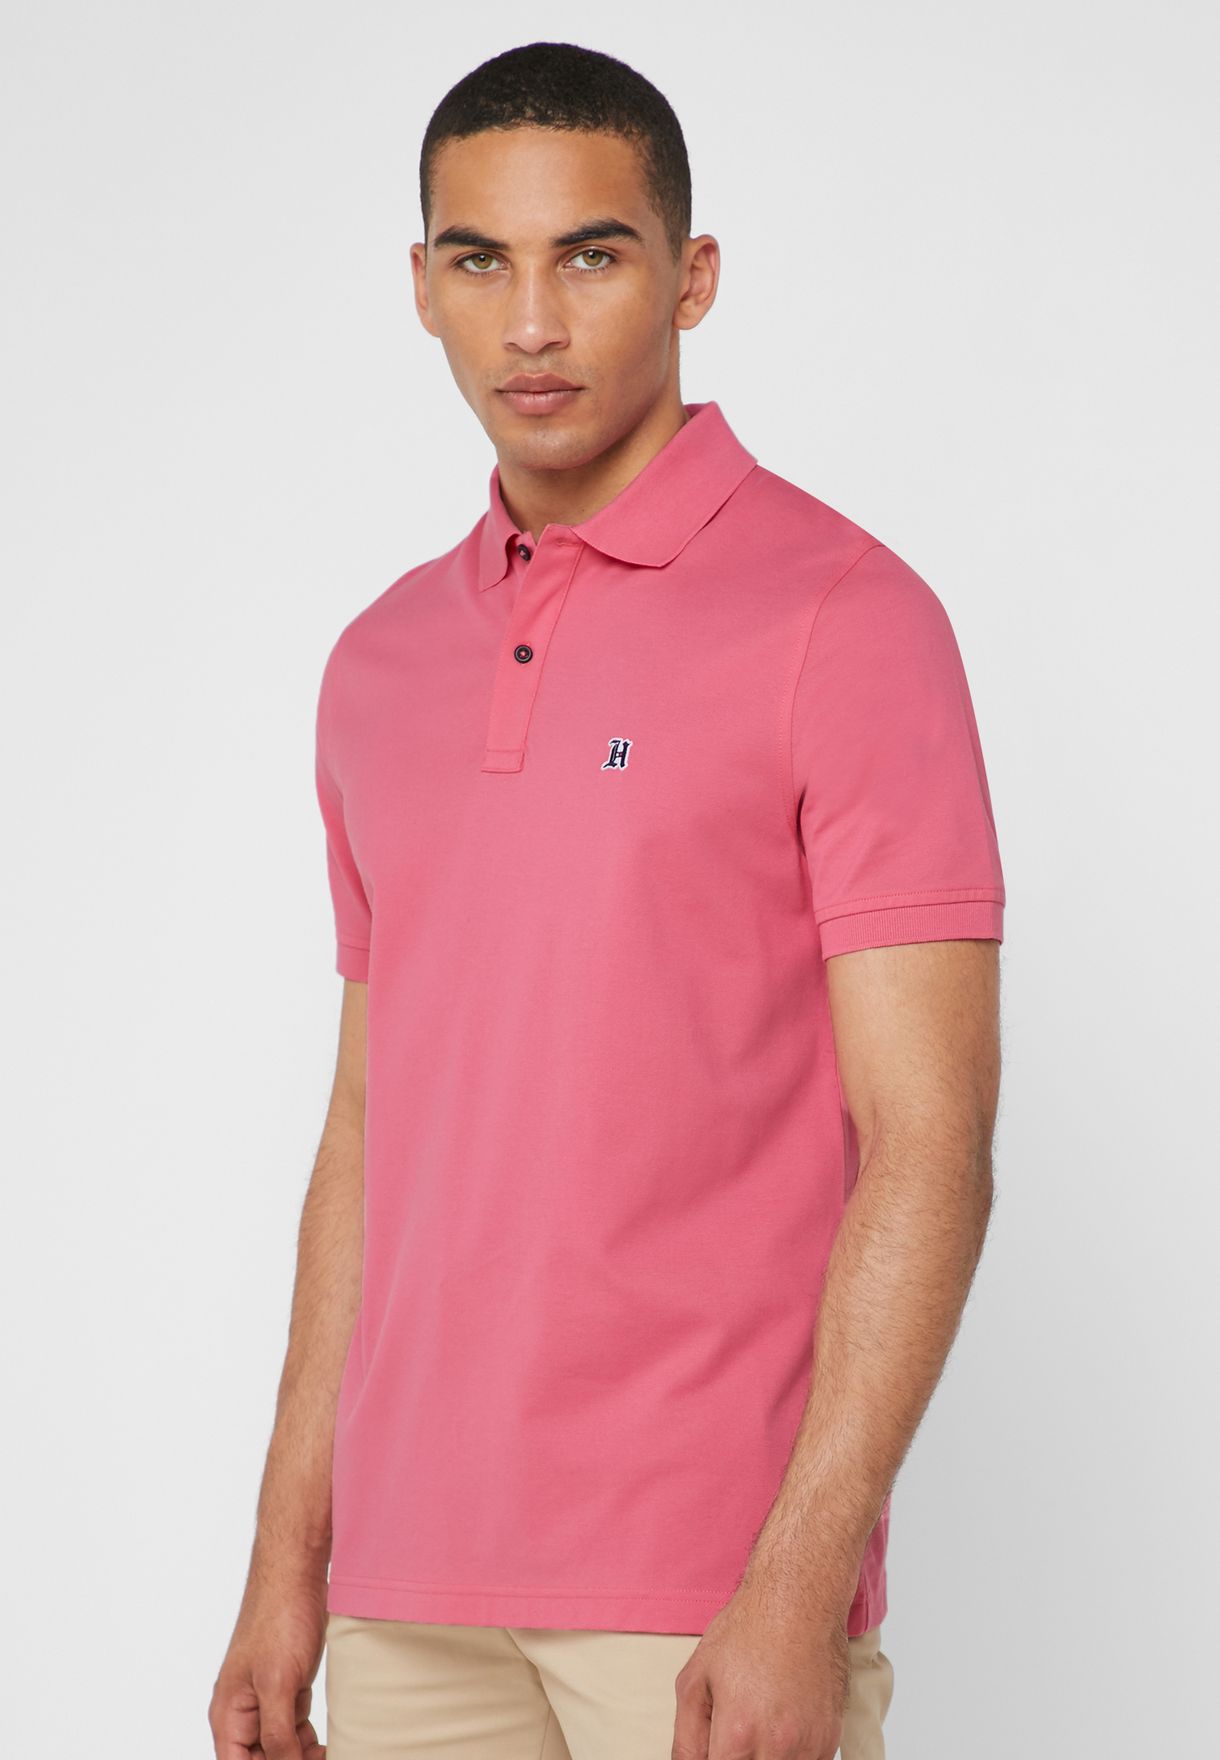 pink polo tommy hilfiger